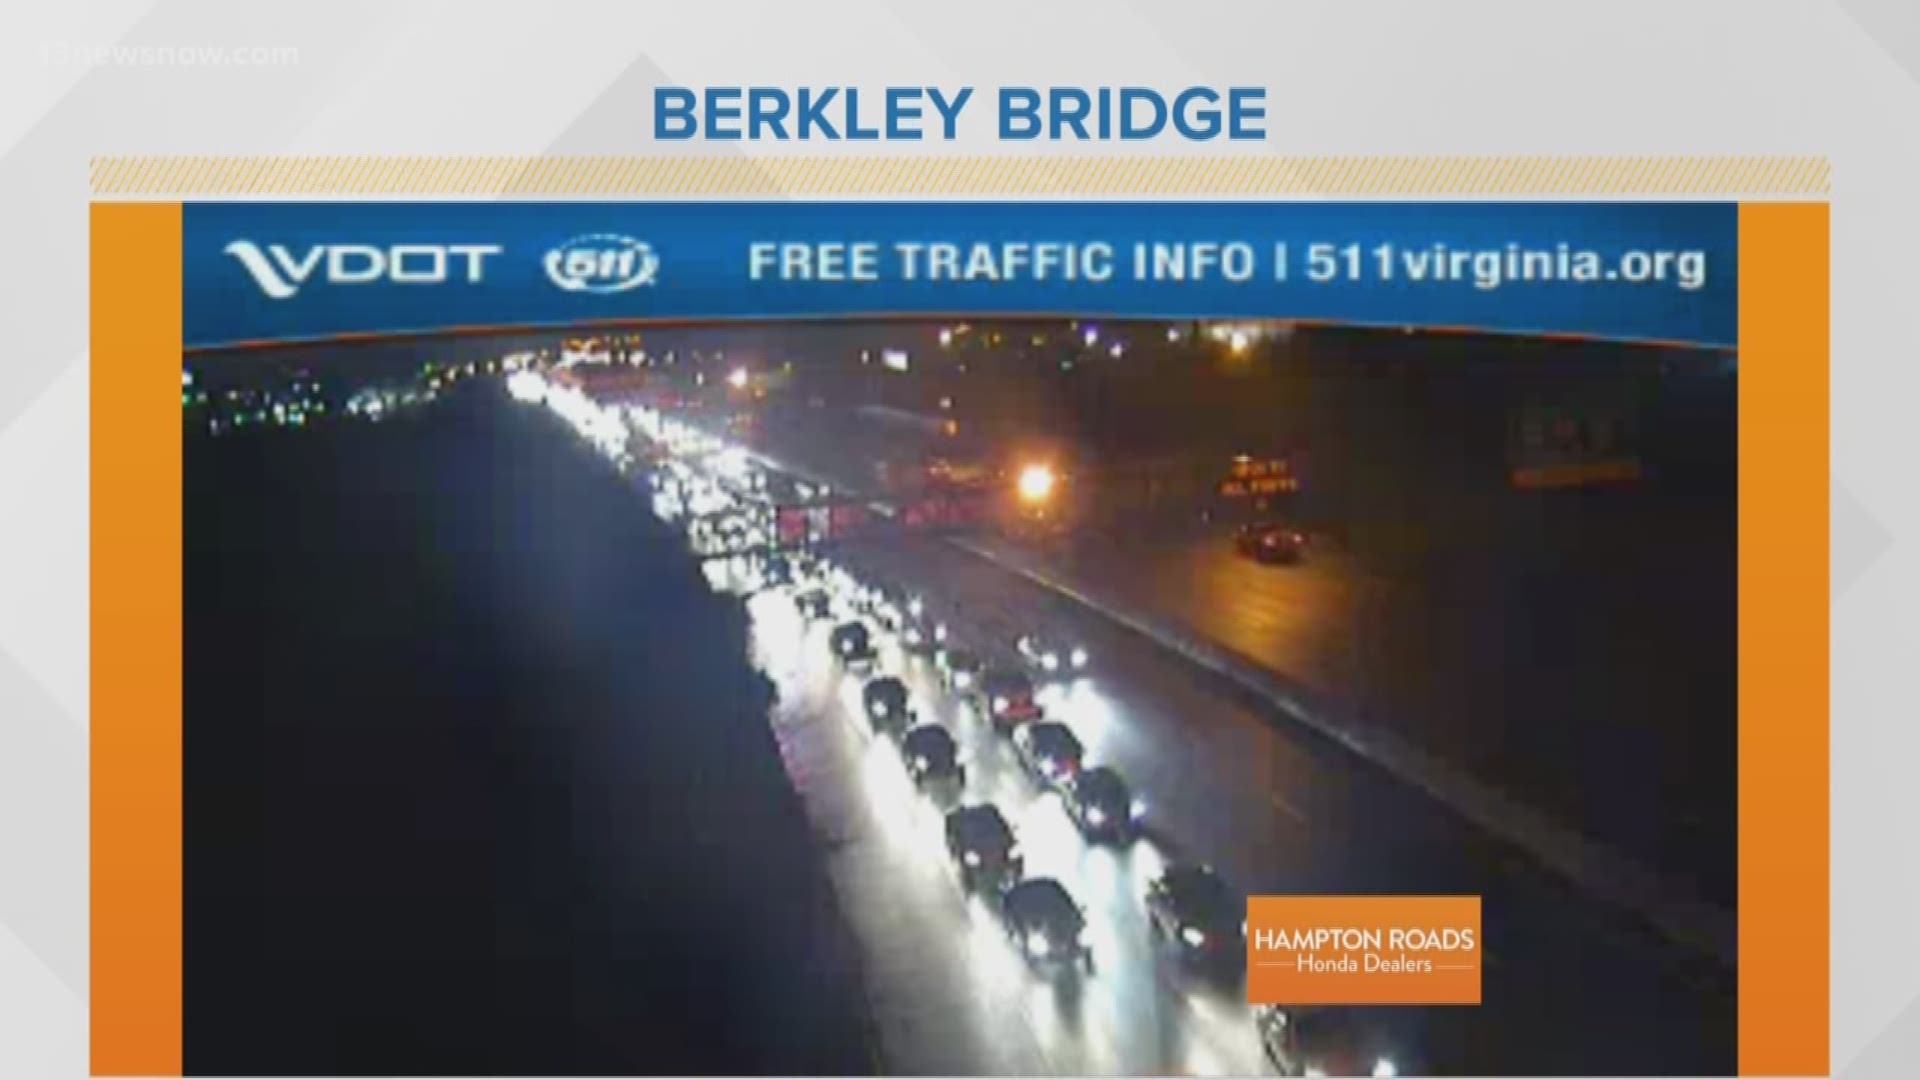 A multi-vehicle crash on I-264 westbound has closed two lanes and caused major congestion near the Berkley Bridge.